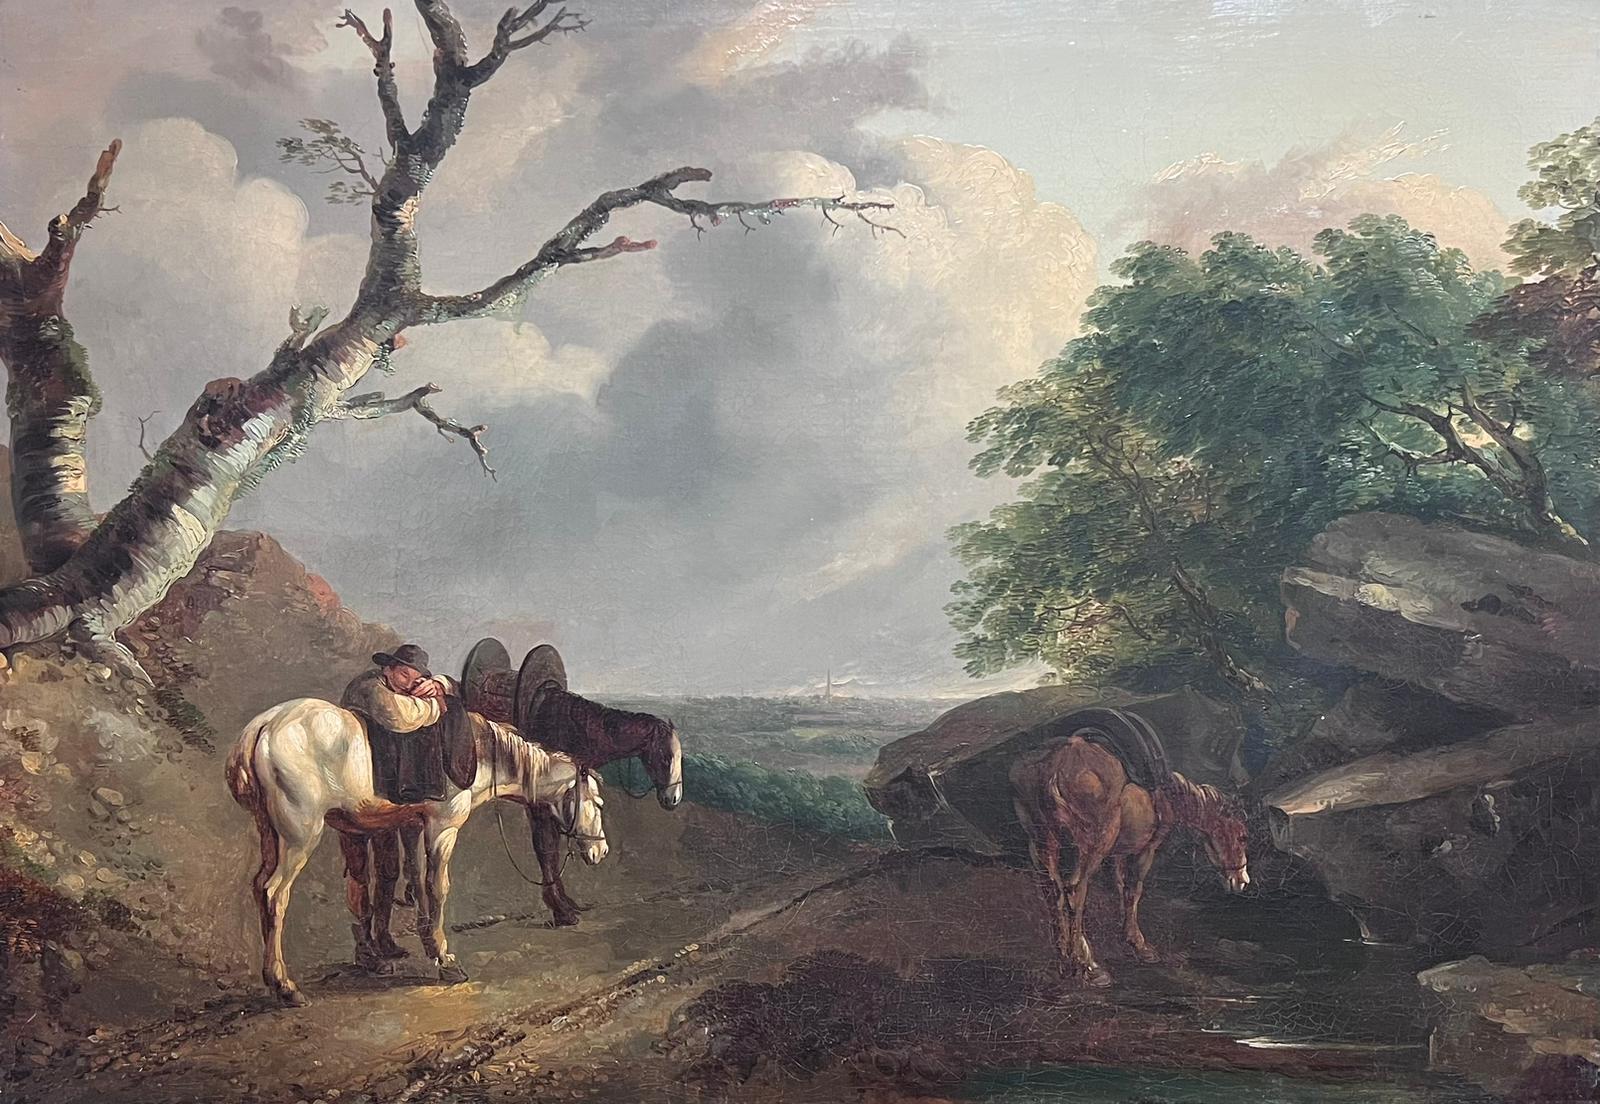 Pausing for a Rest
English School, circa 1800
the painting is very close to the works of Thomas Barker of Bath (English 1769-1847)
oil on canvas, framed
framed: 29 x 39 inches
canvas: 24 x 34 inches
provenance: private collection, Wiltshire,